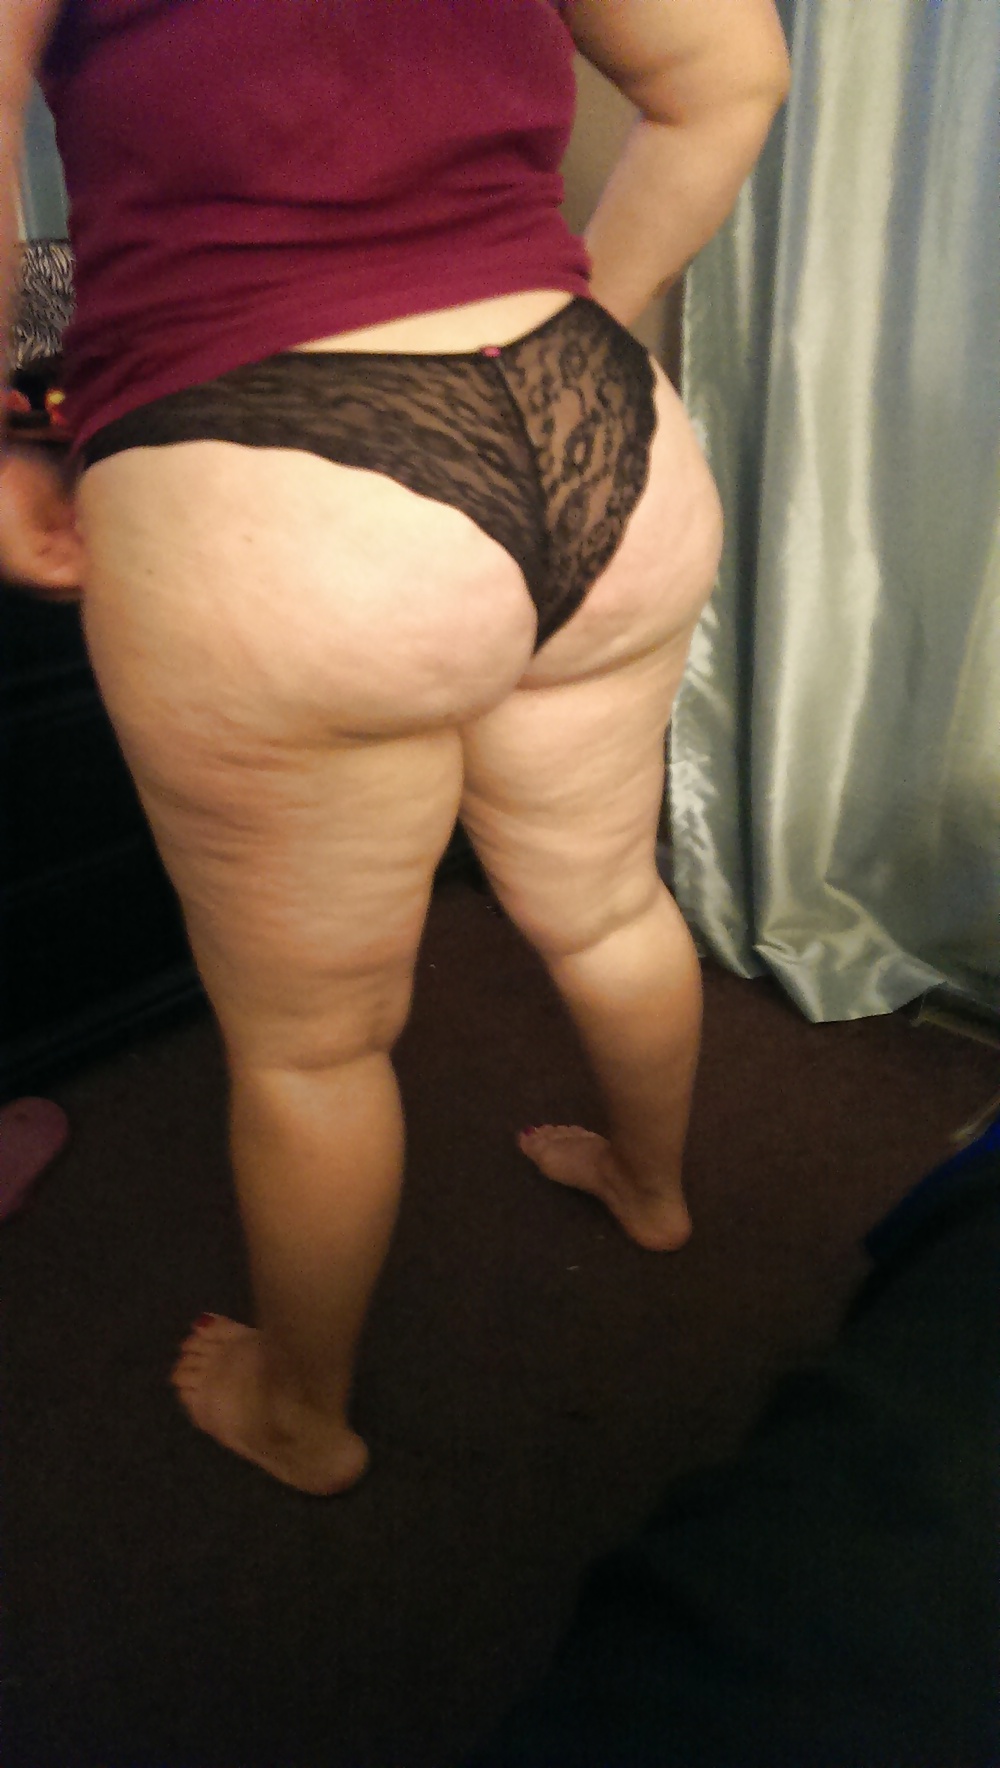 Pawg in new thong #19866513